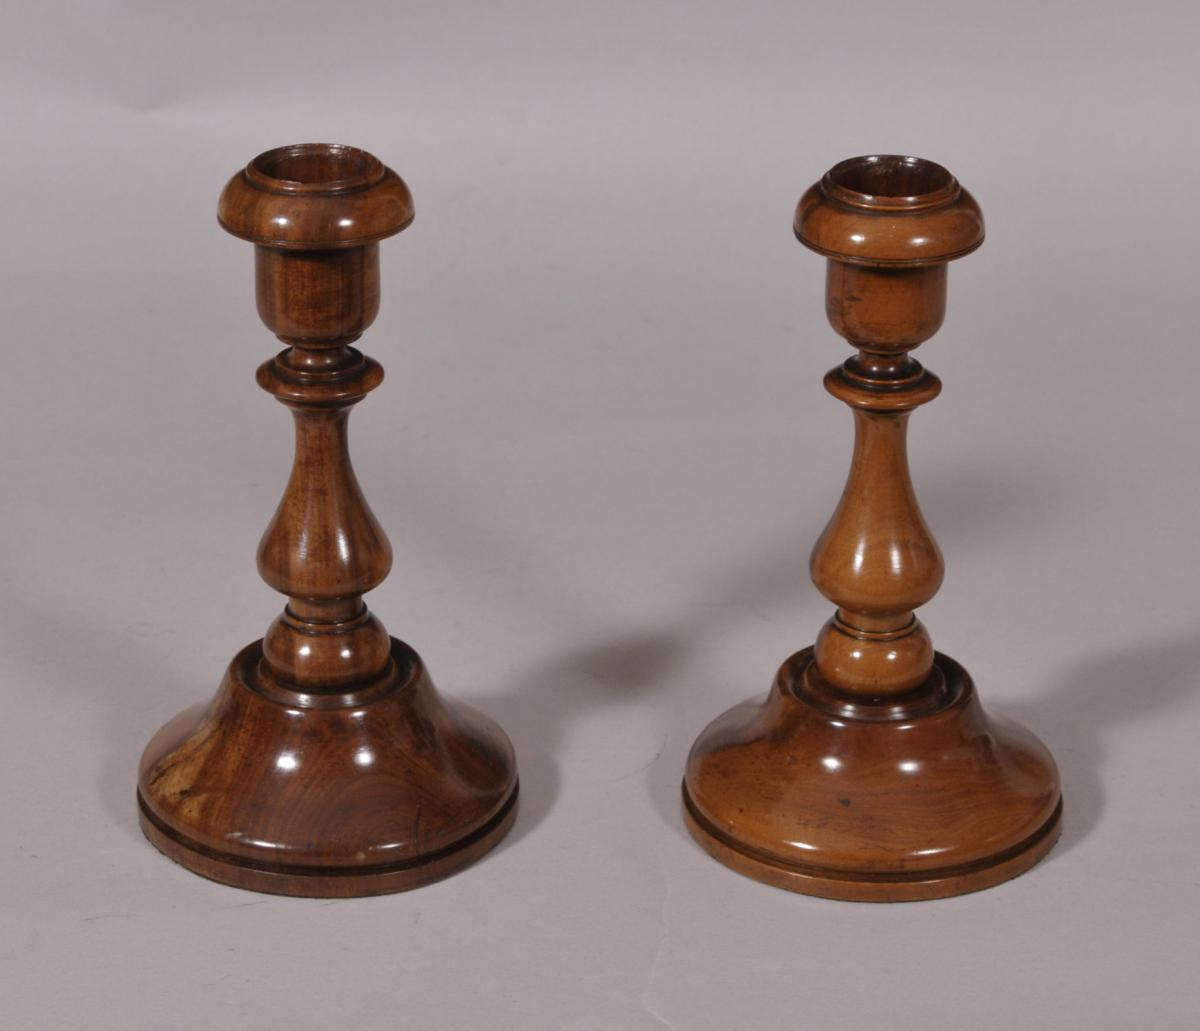 S/4604 Antique Treen Pair of 19th Century Yew Wood Candlesticks